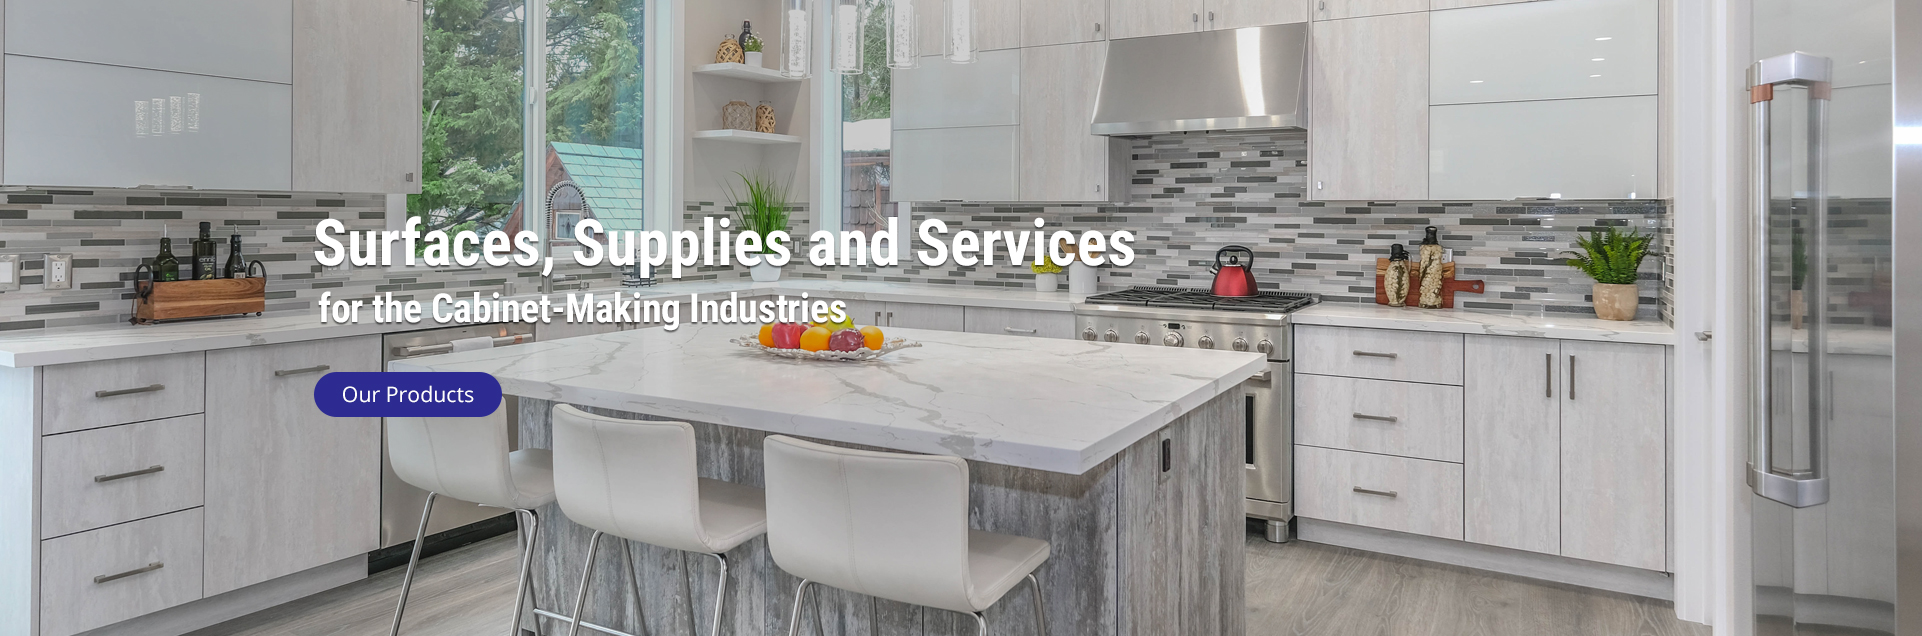 Surfaces, Supplies and Services for Building Material Industries